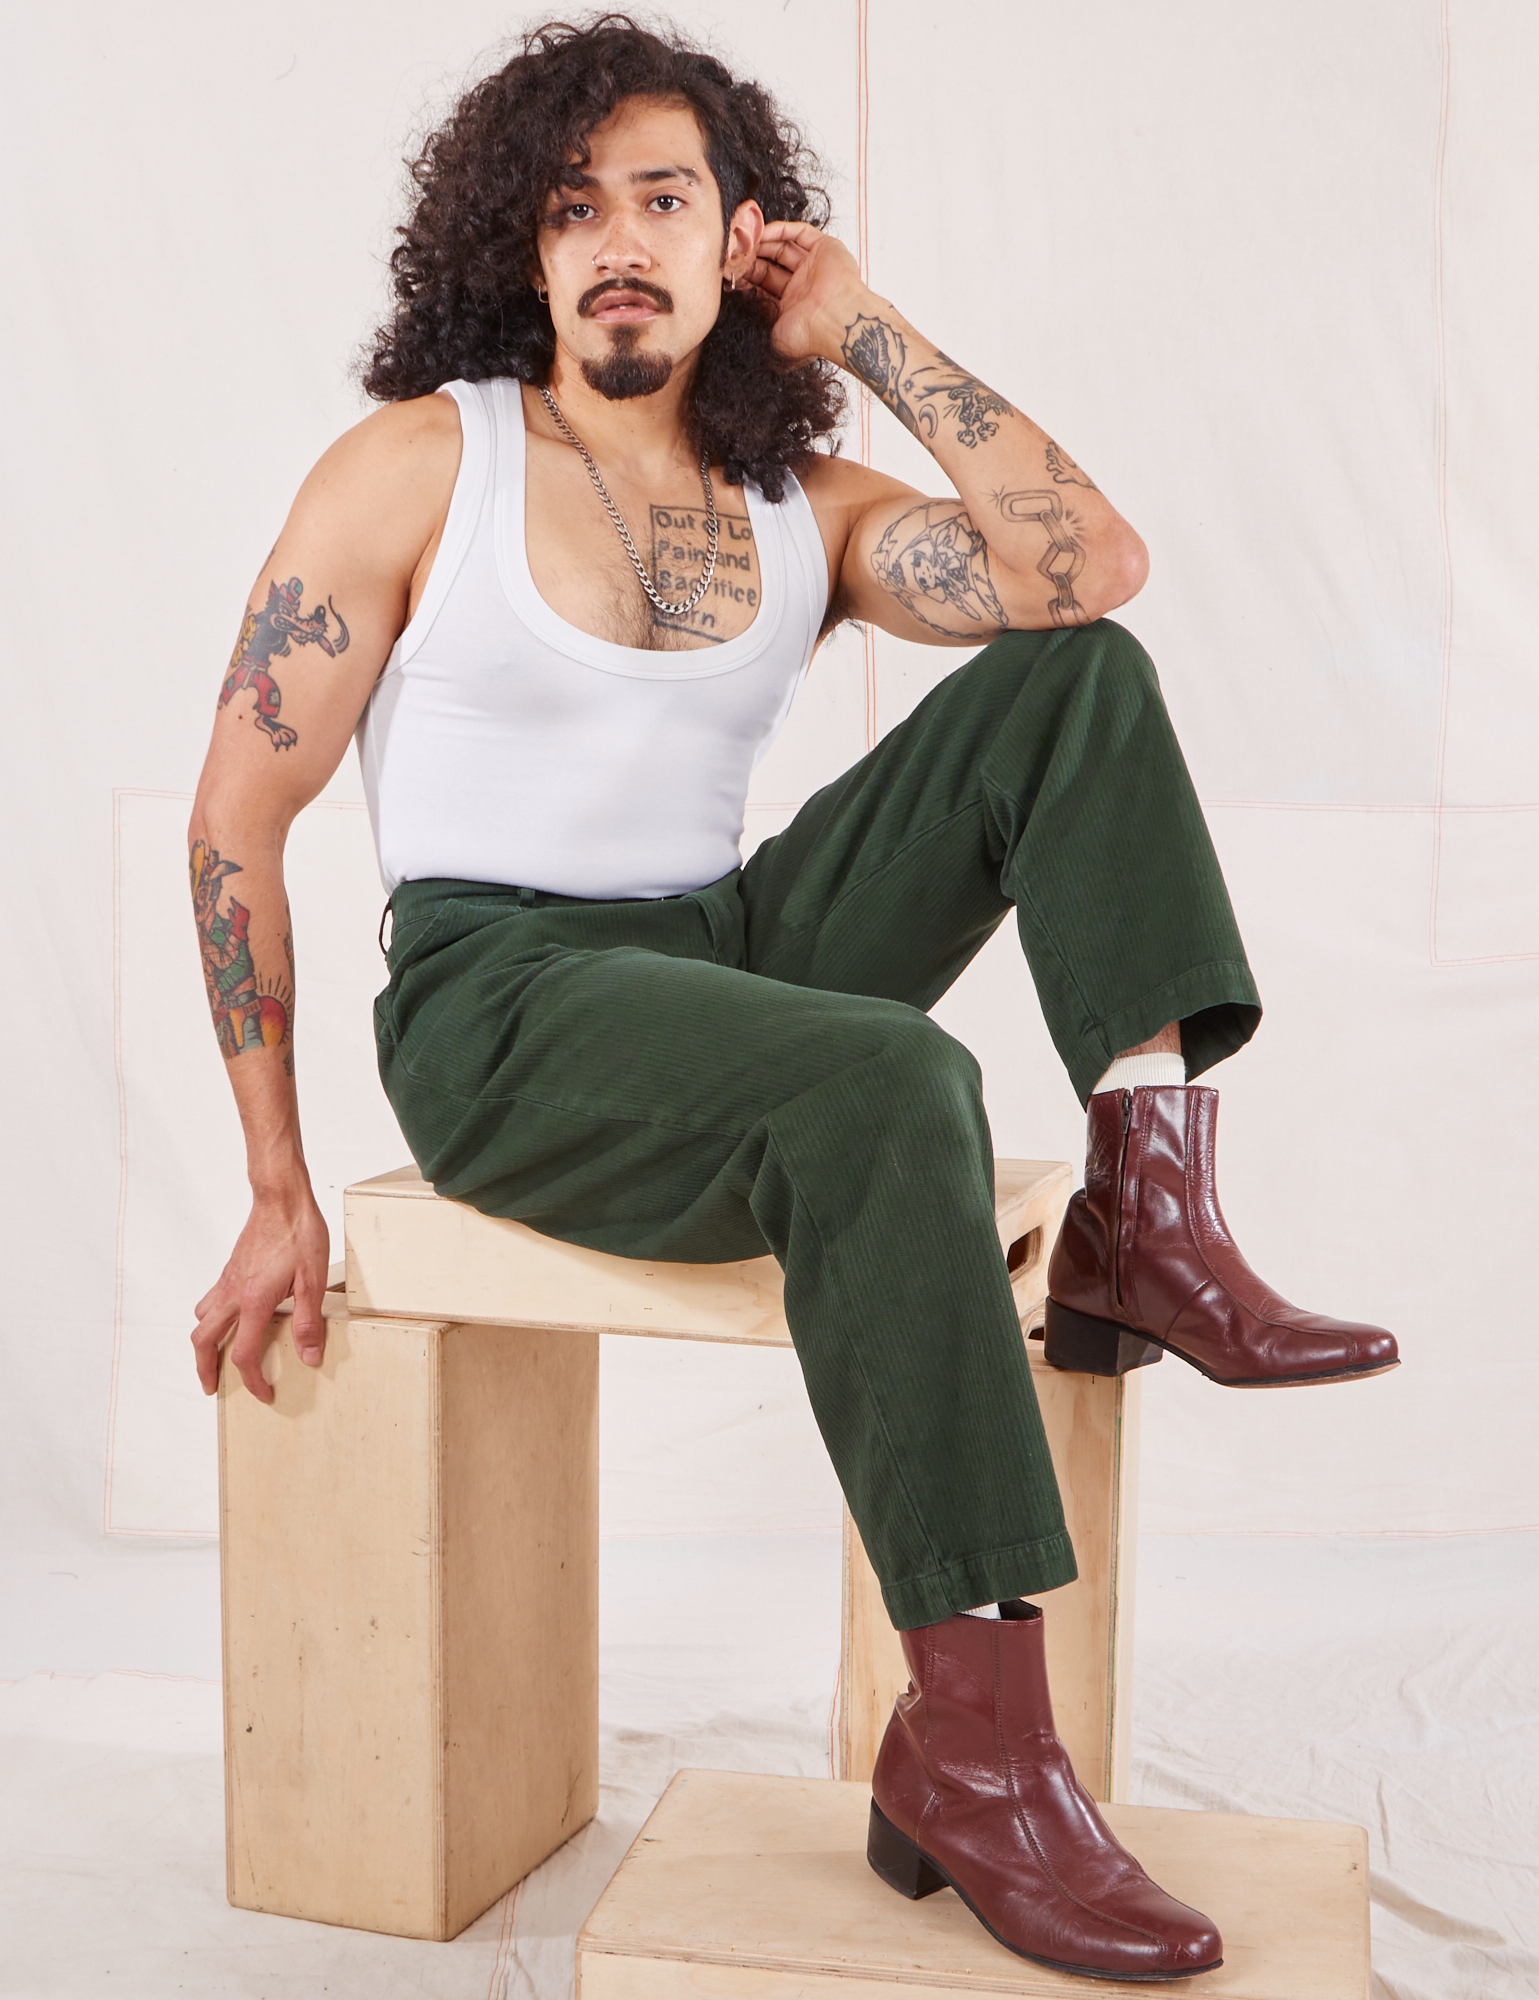 Jesse is wearing Heritage Trousers in Swamp Green and vintage off-white Tank Top